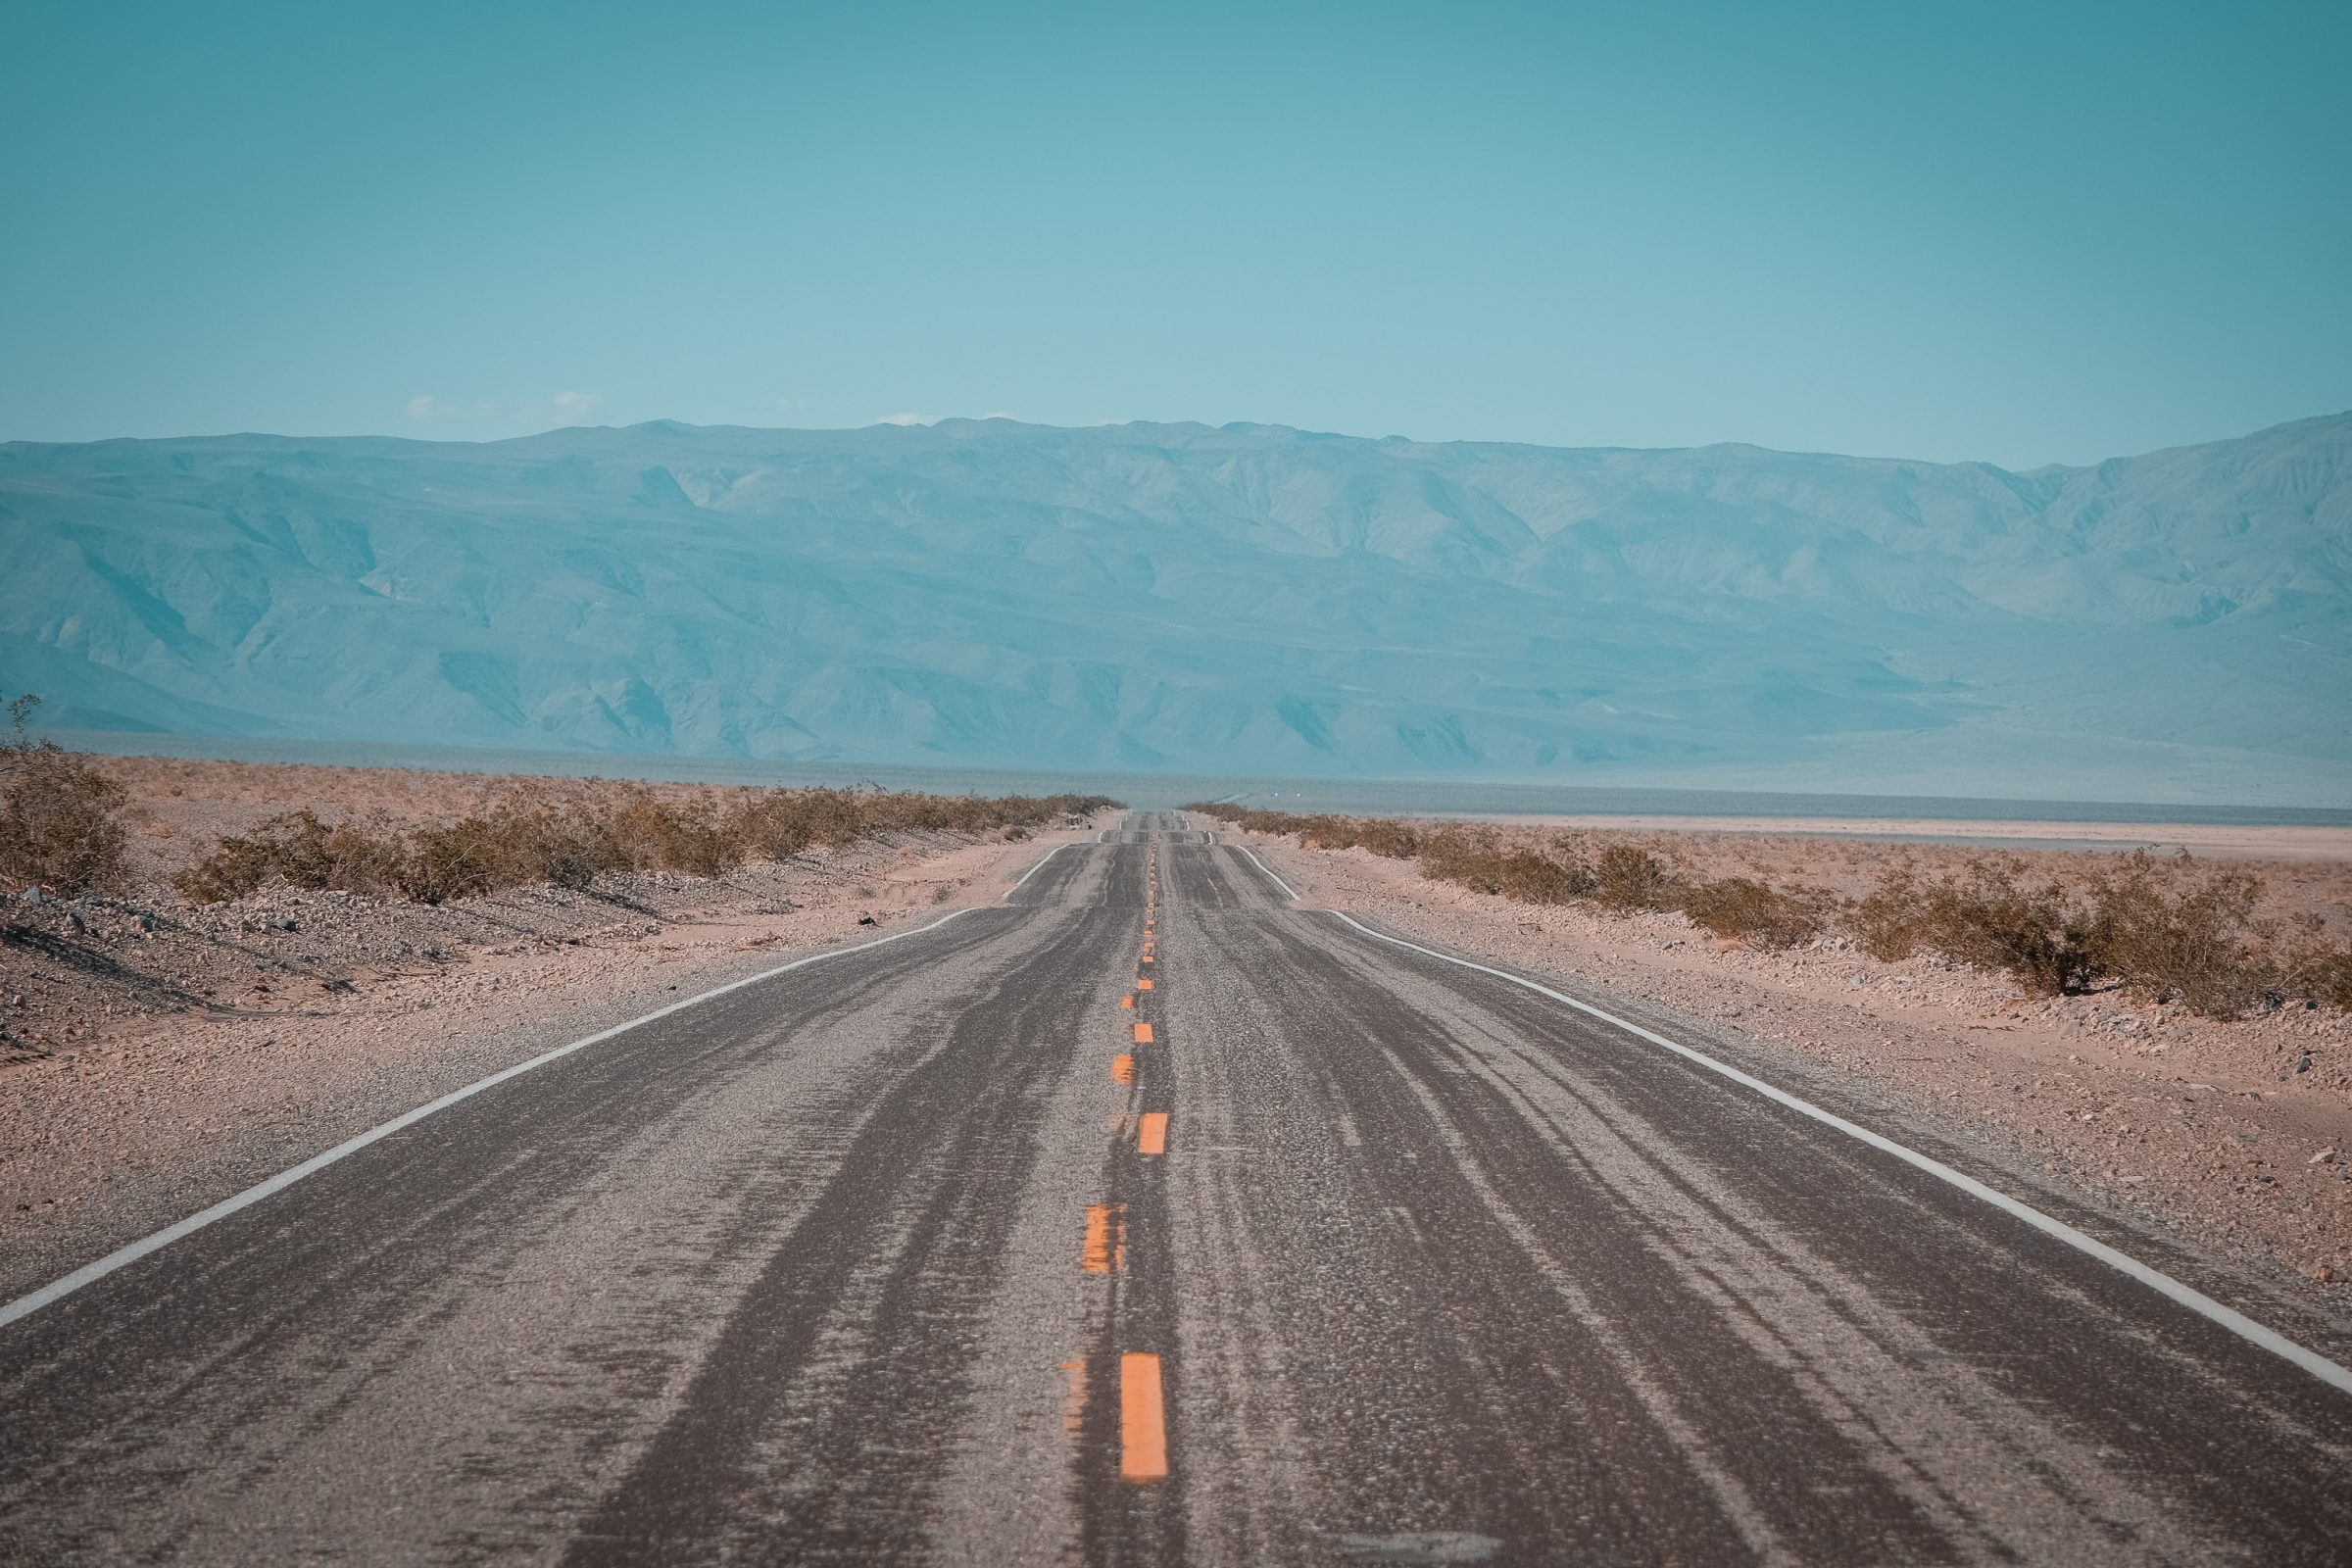 The endless roads in Death Valley